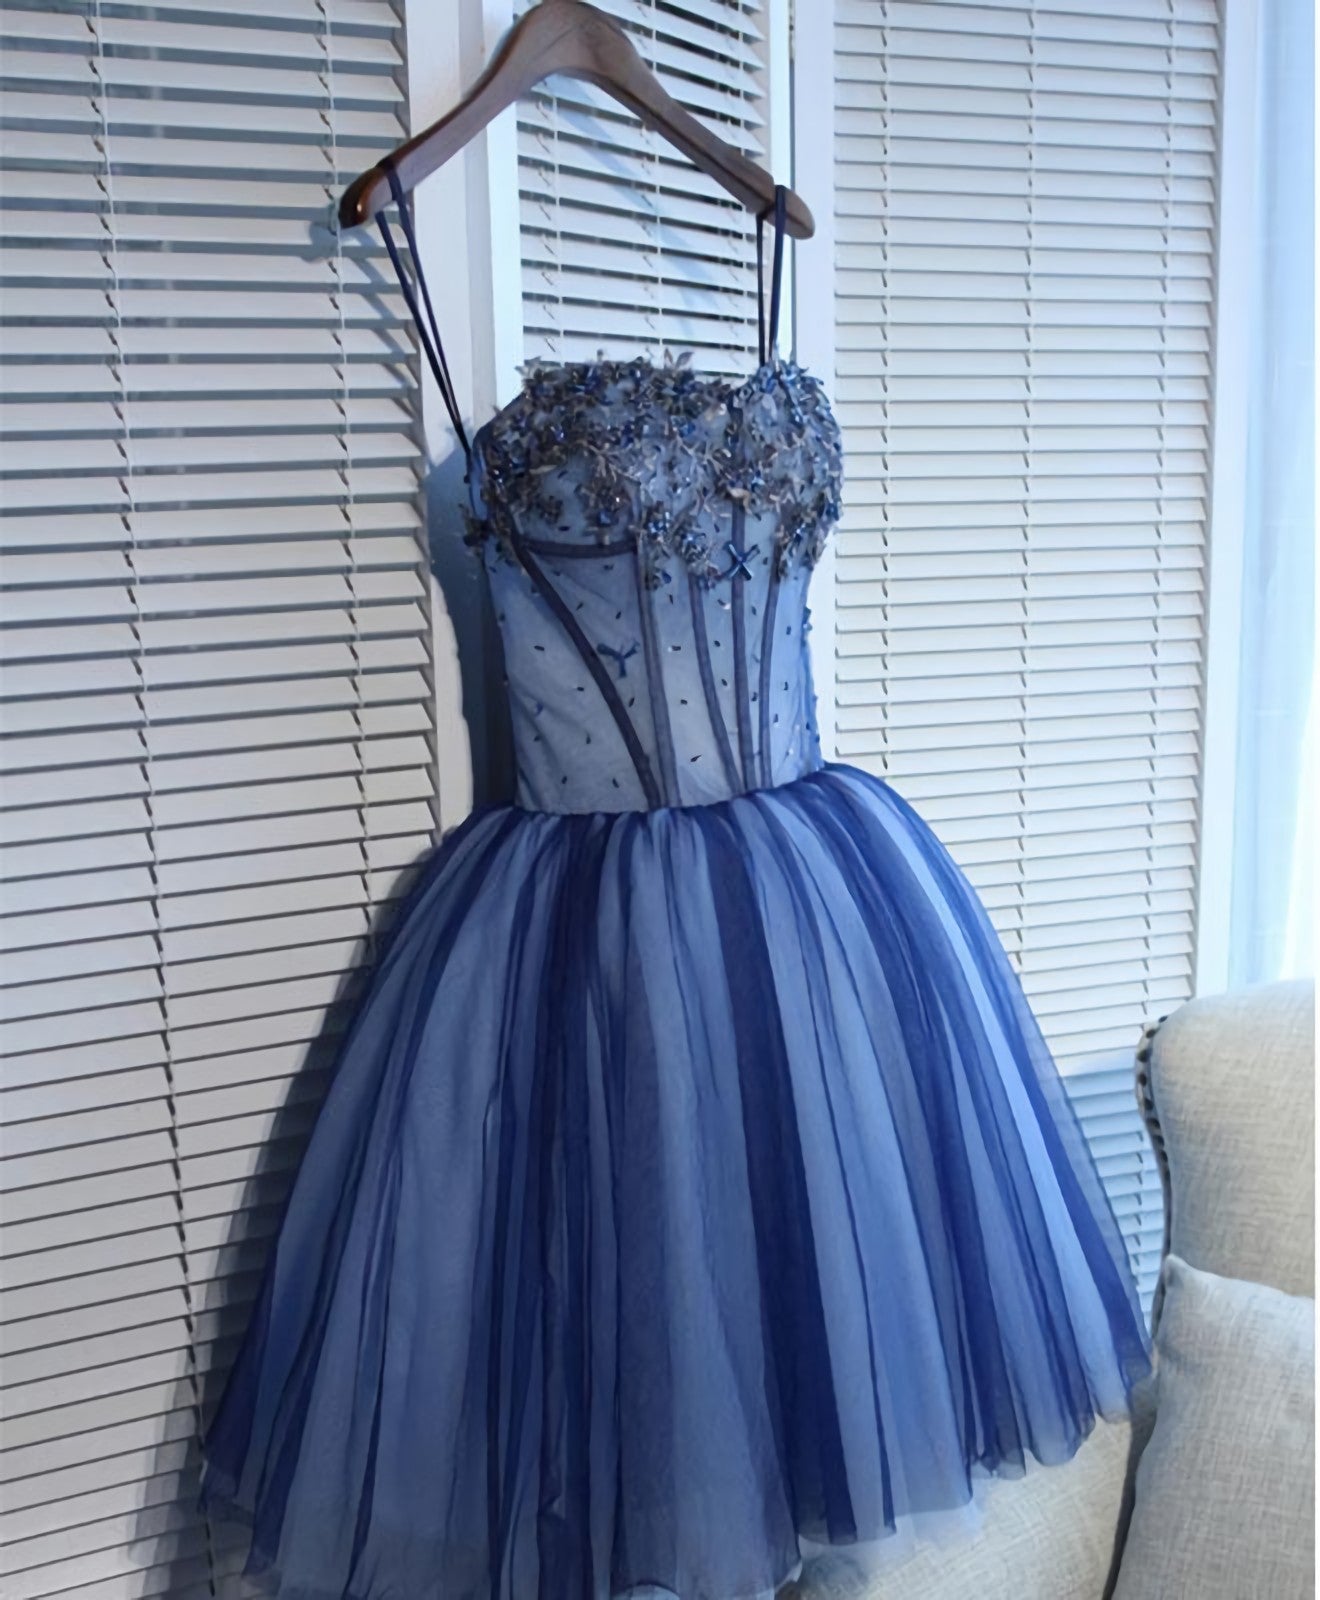 Charming Blue Lace Tule A Lin Short Corset Prom Dress, Corset Homecoming Dress outfit, Formal Dress For Wedding Party